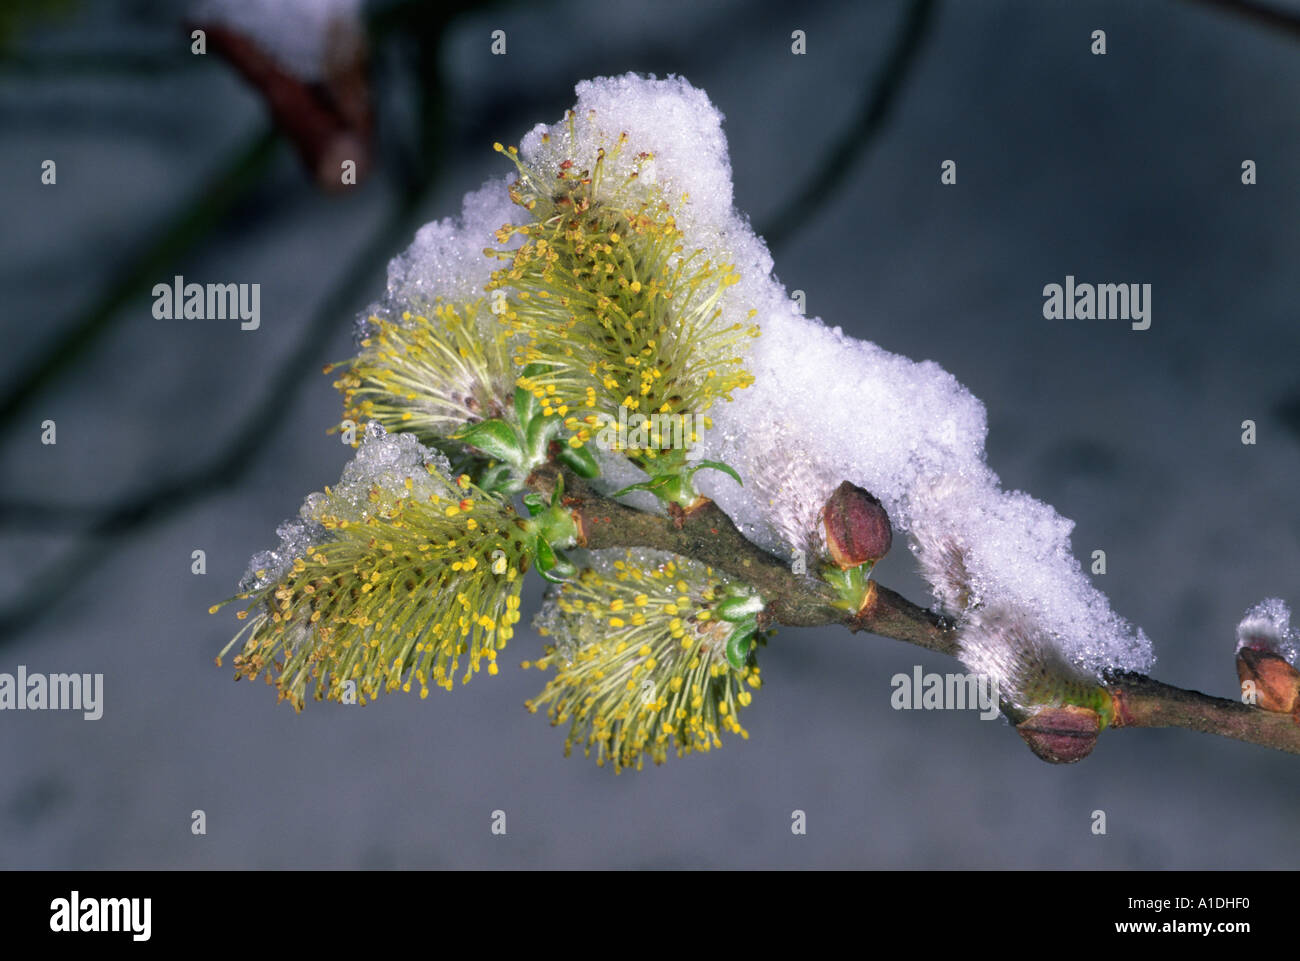 Willow, Salix sp. Closeup of snow covered flowers Stock Photo